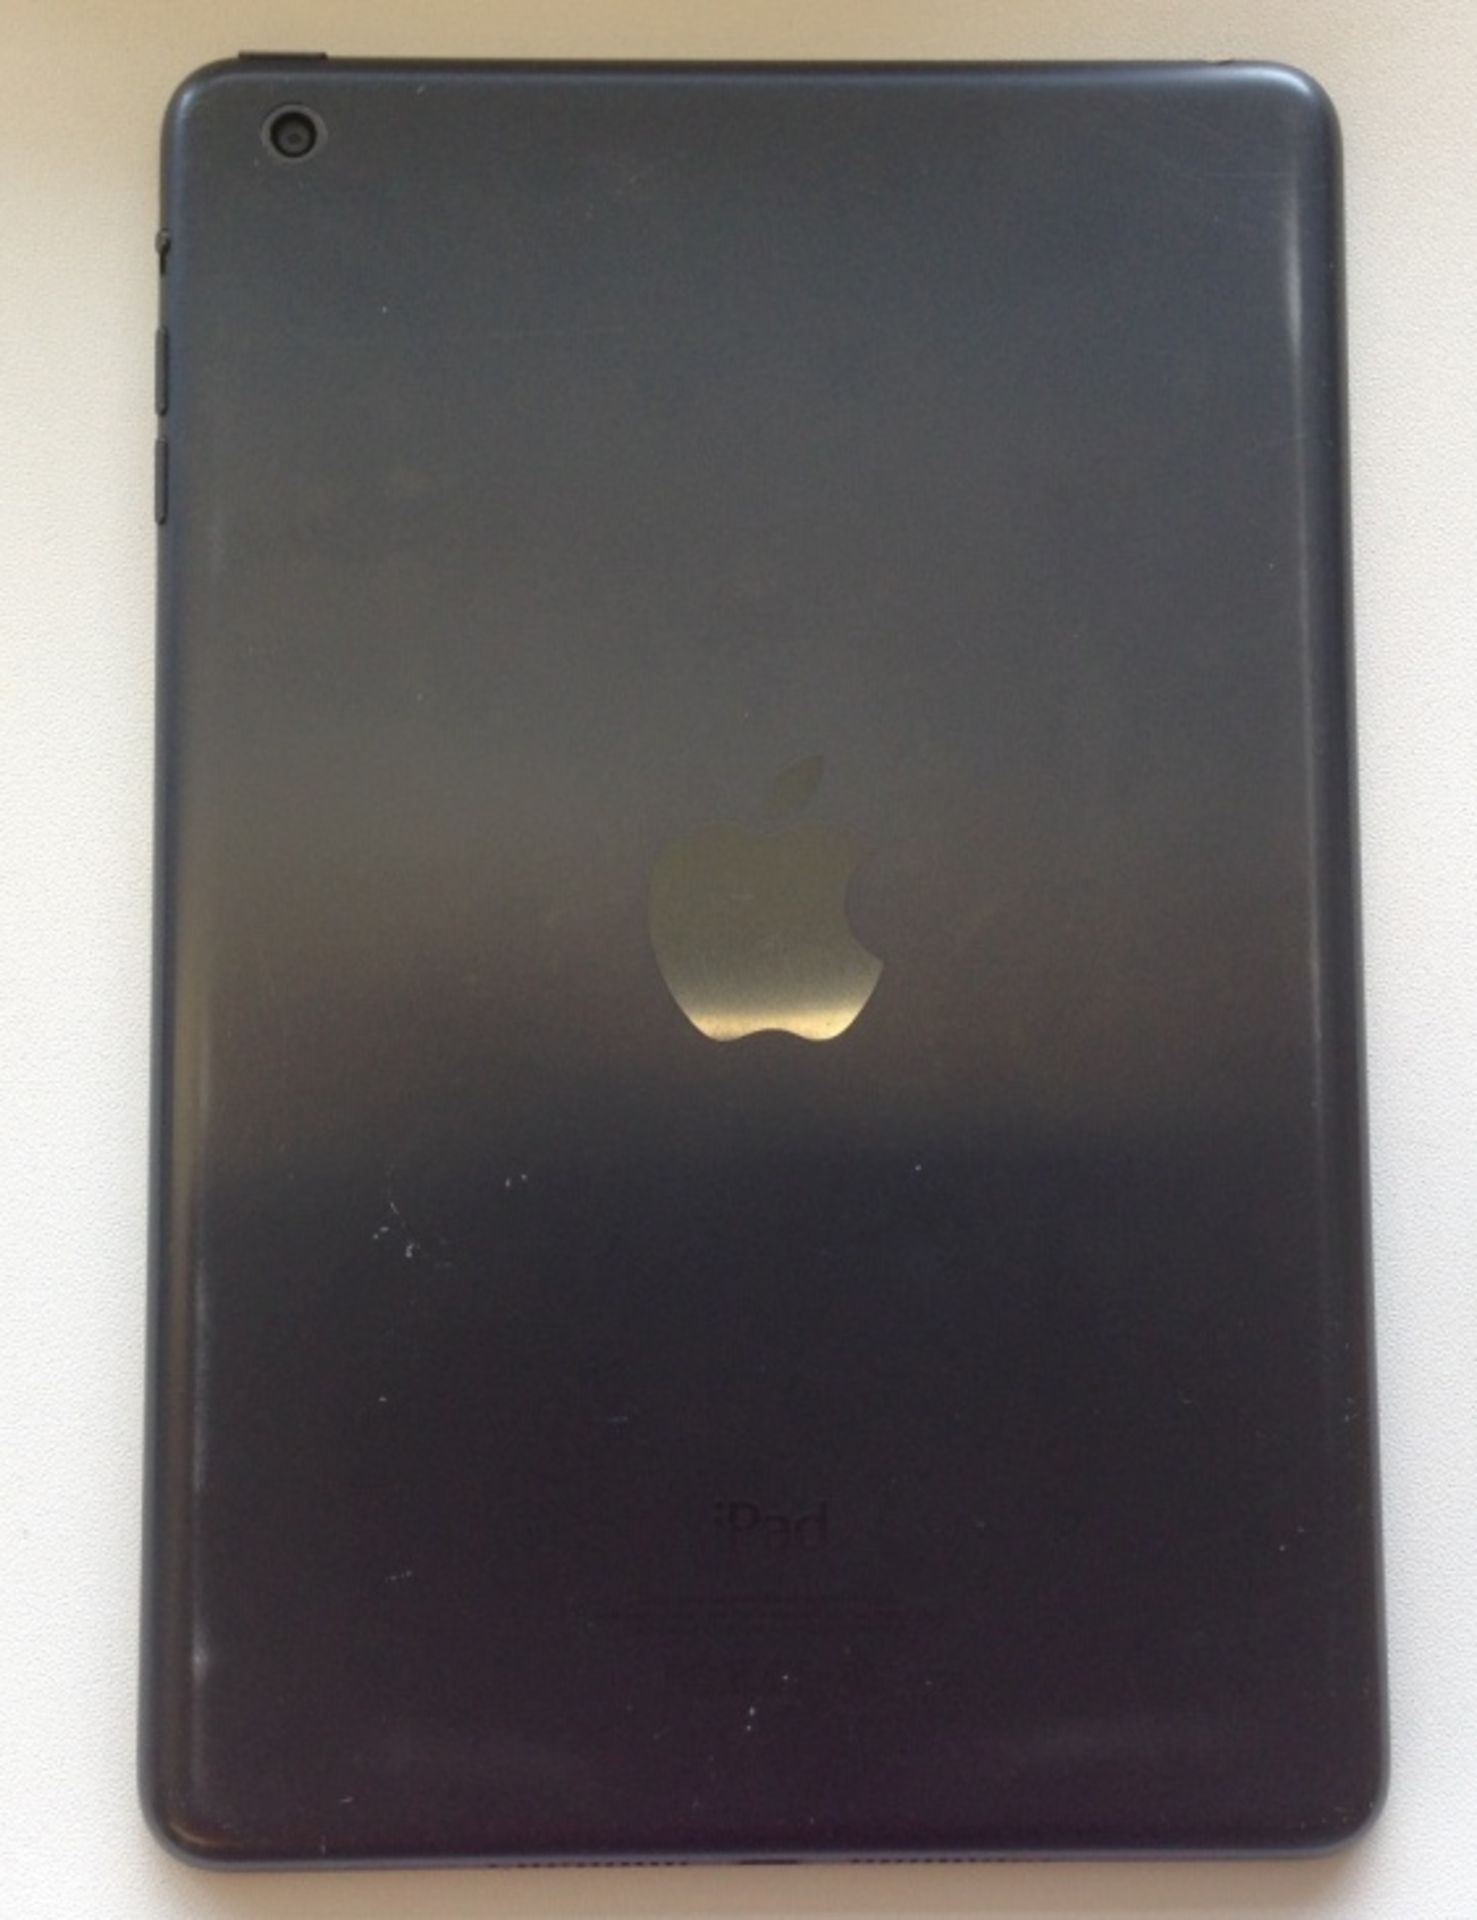 Ipad Mini 16GB Space Grey  Grade B+ fully tested may have light scratches original Box + Cable - Image 2 of 3